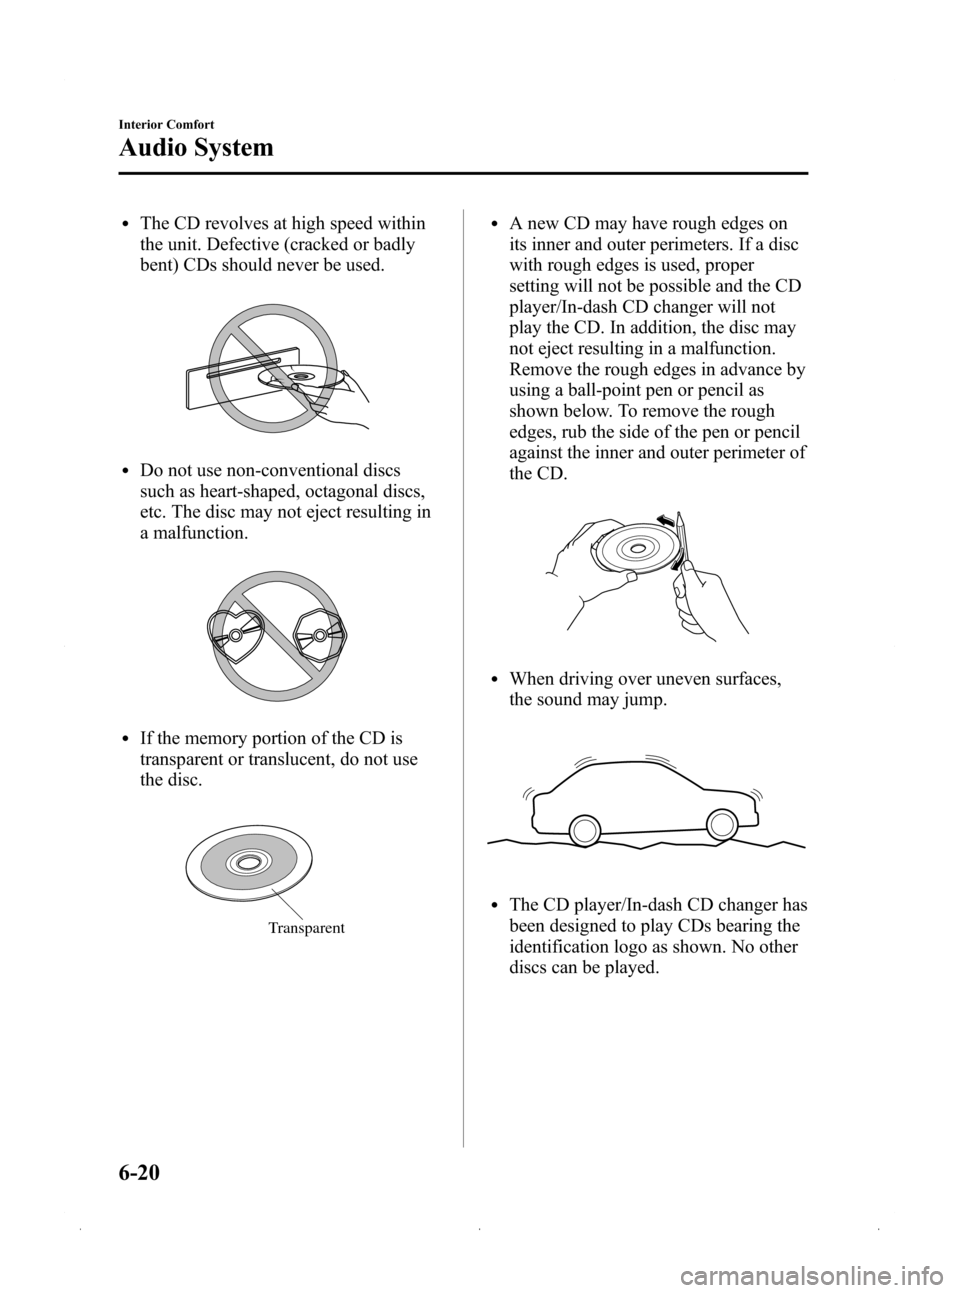 MAZDA MODEL 3 HATCHBACK 2009  Owners Manual (in English) Black plate (204,1)
lThe CD revolves at high speed within
the unit. Defective (cracked or badly
bent) CDs should never be used.
lDo not use non-conventional discs
such as heart-shaped, octagonal discs